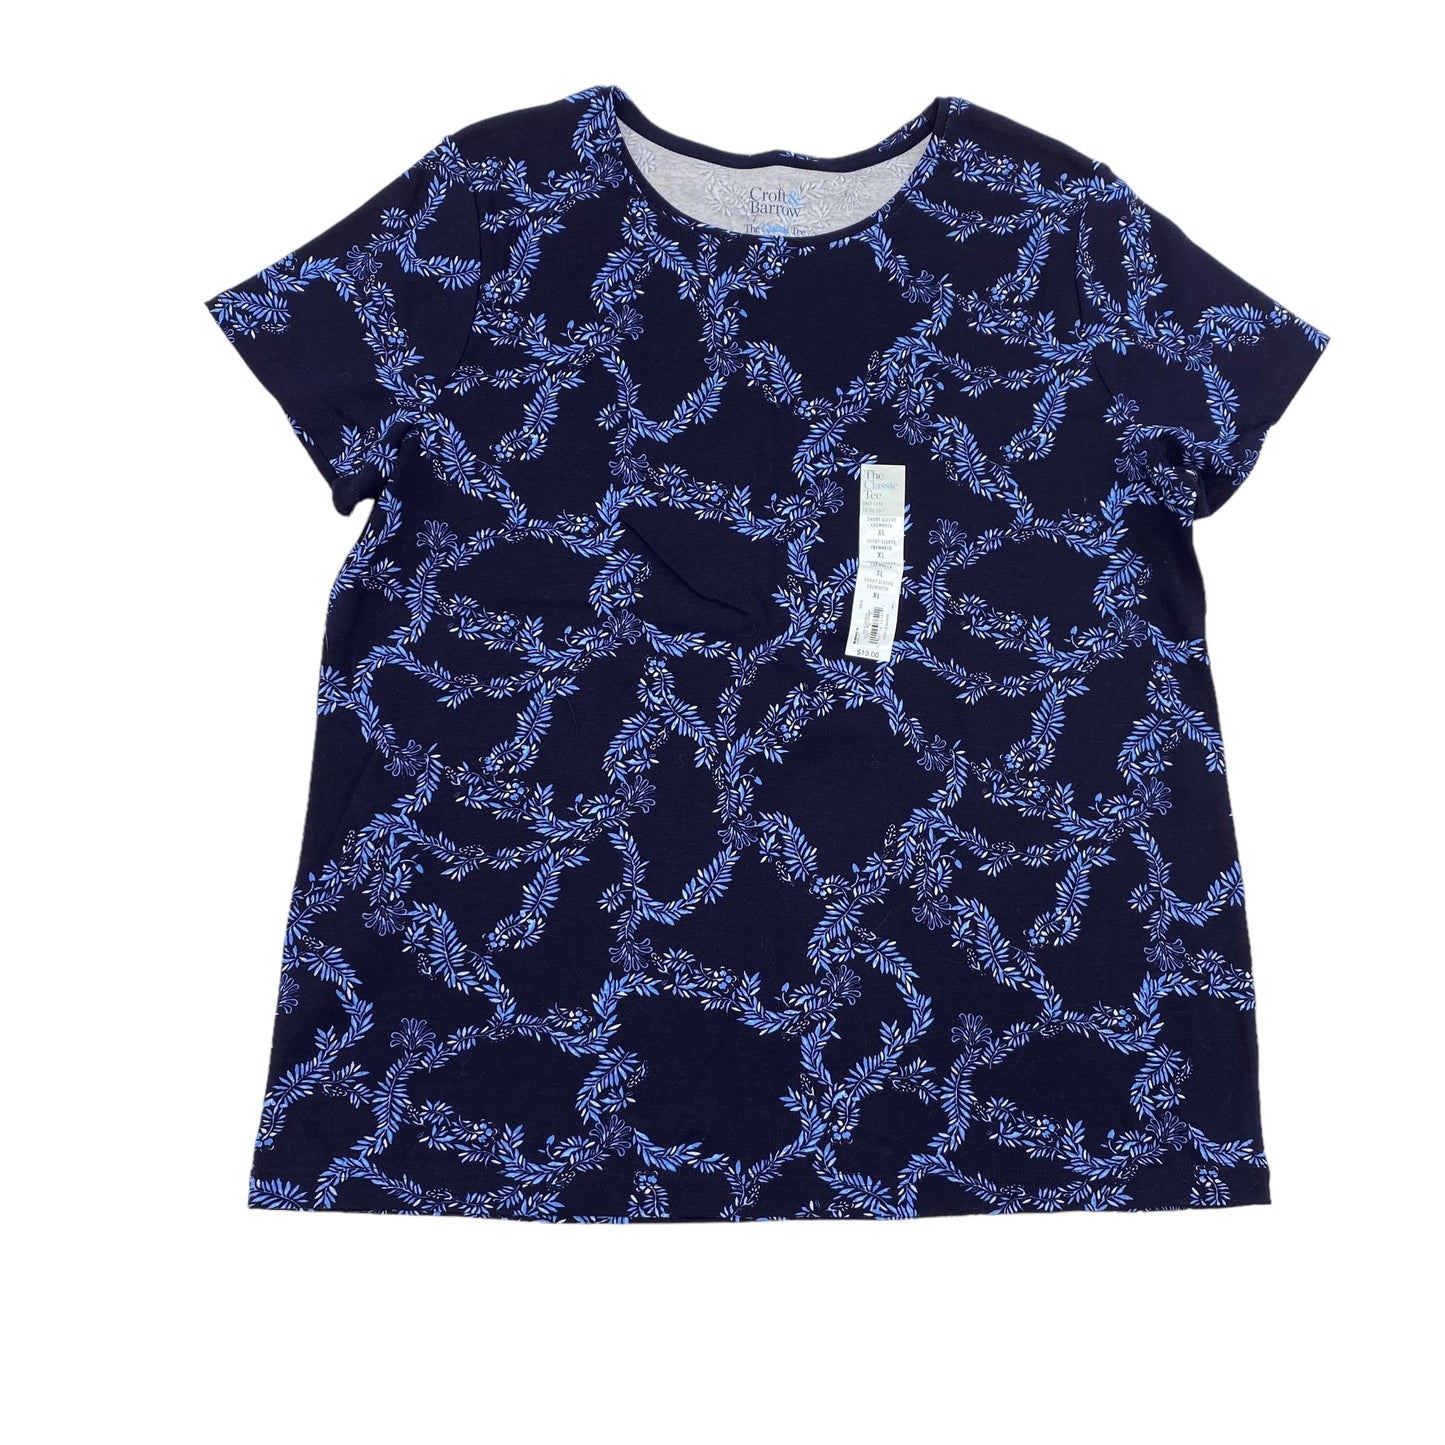 NAVY TOP SS by CROFT AND BARROW Size:XL